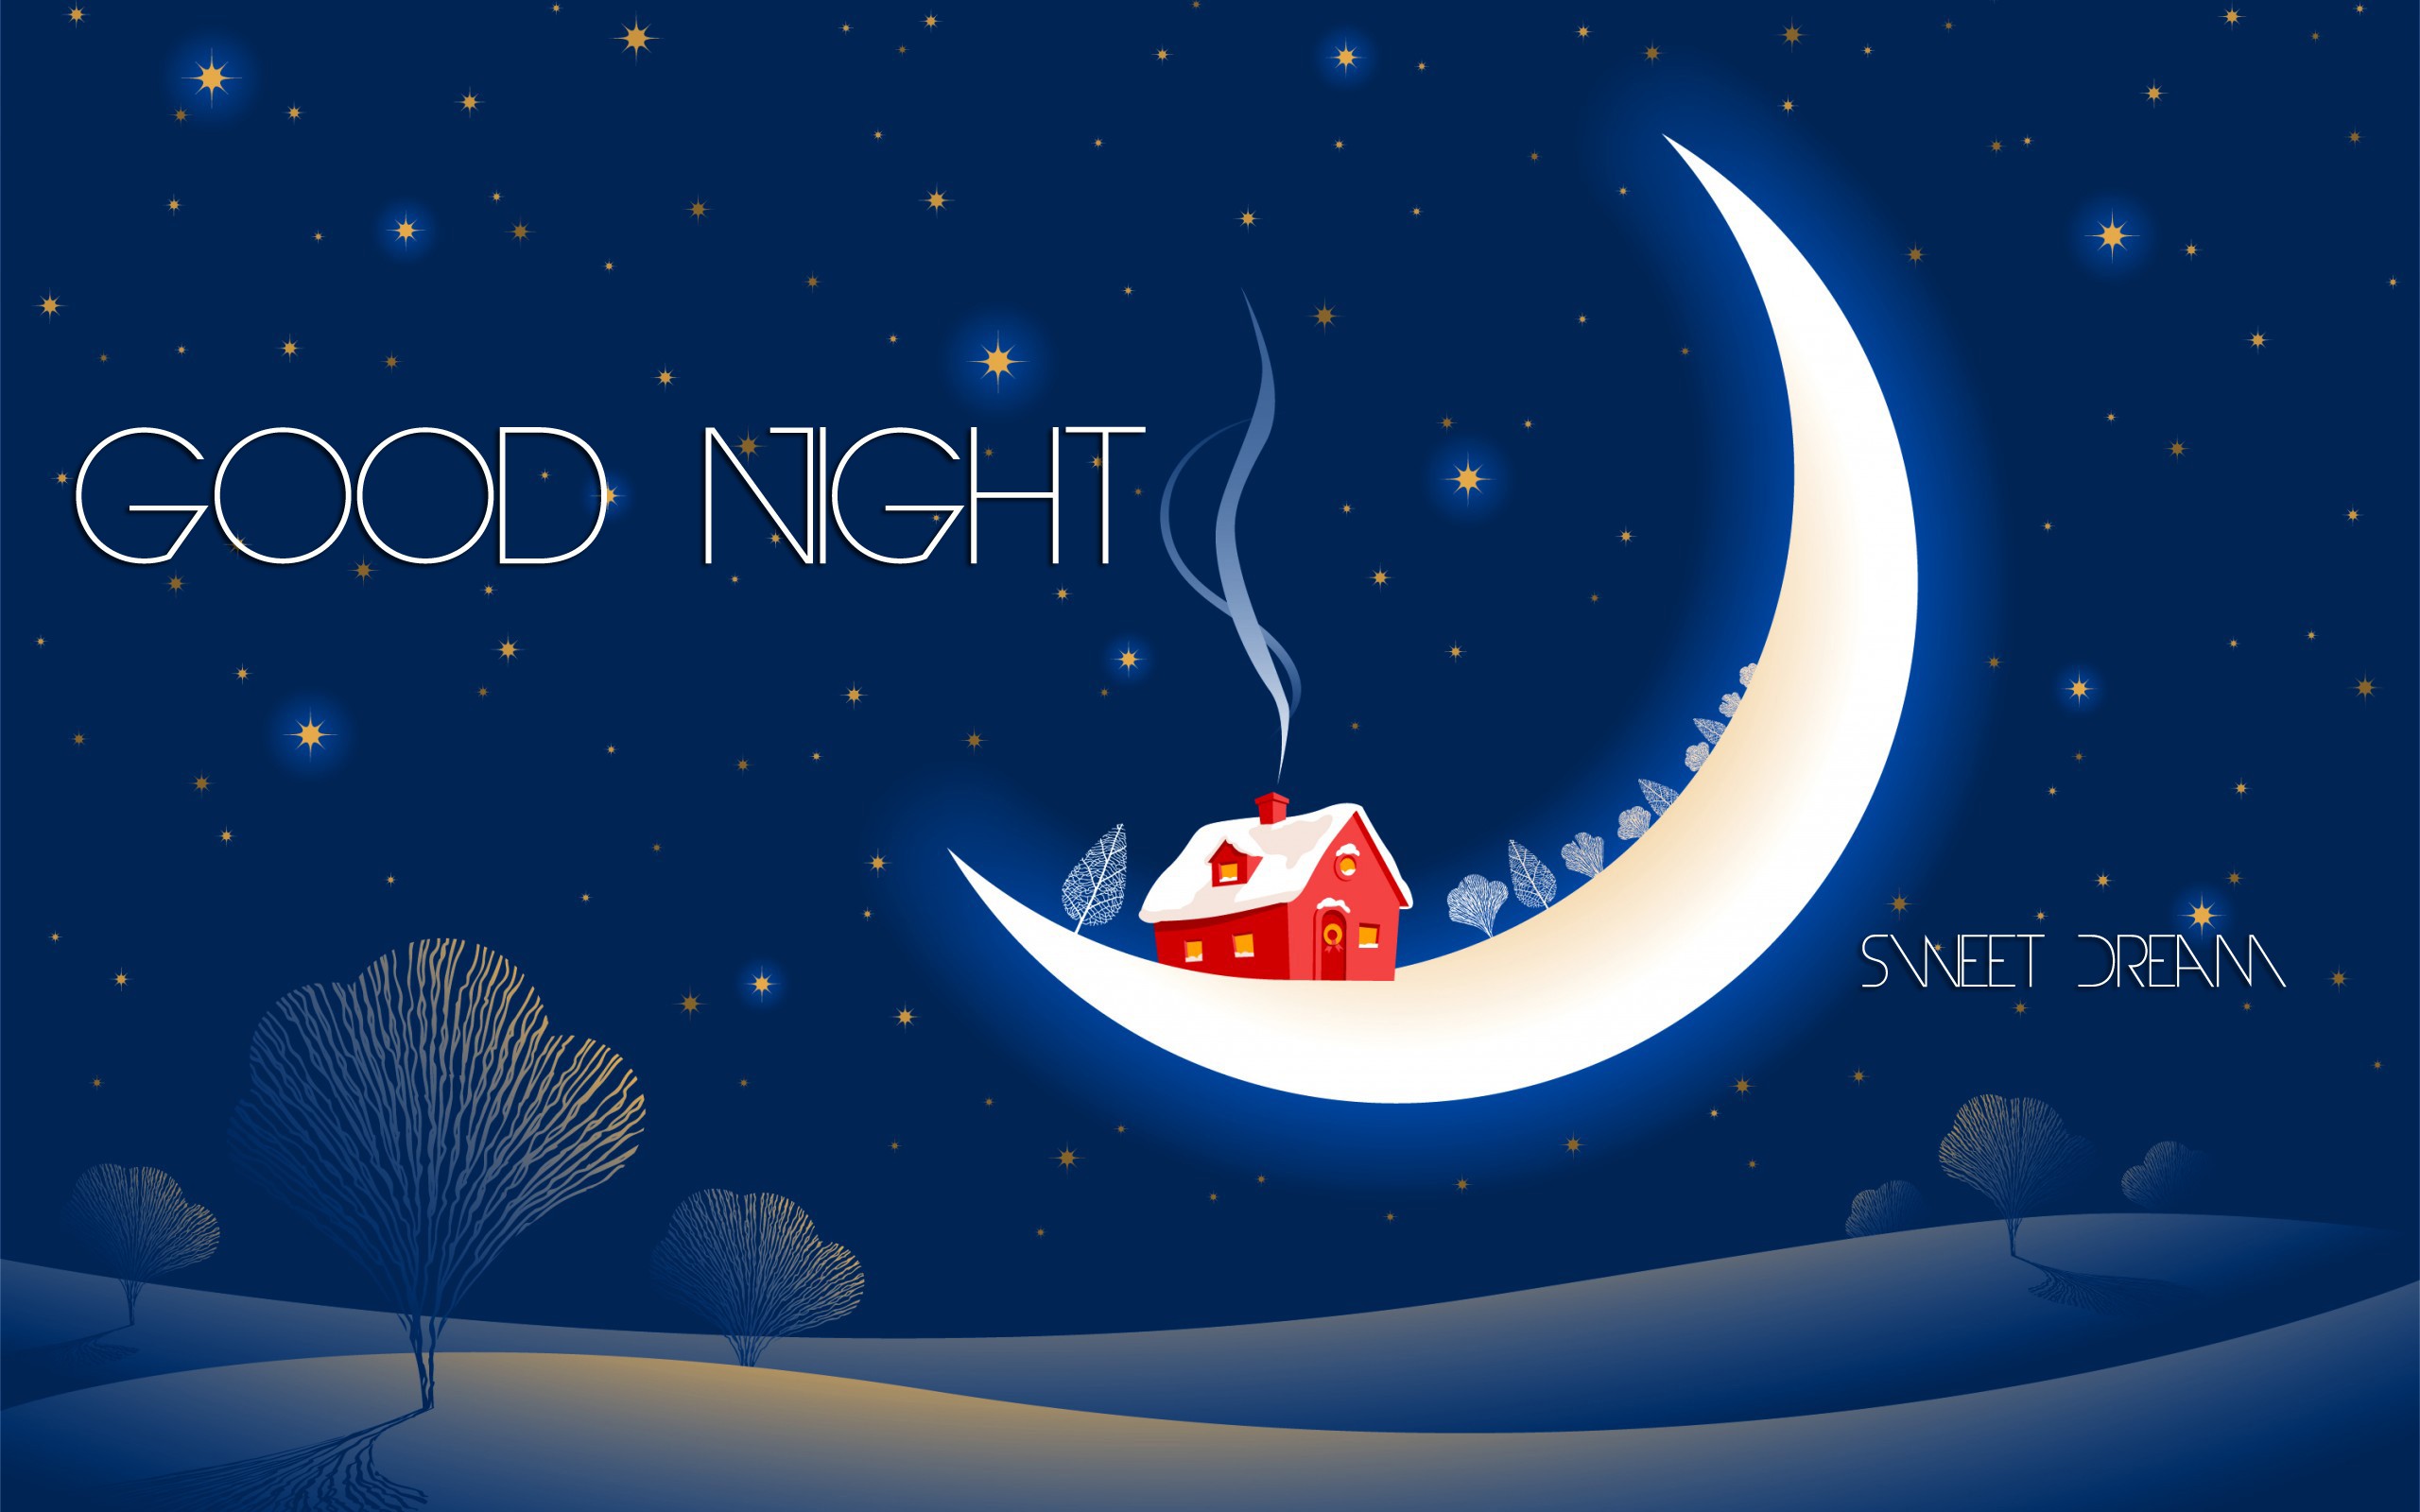 Good Night Wallpaper Pictures Image